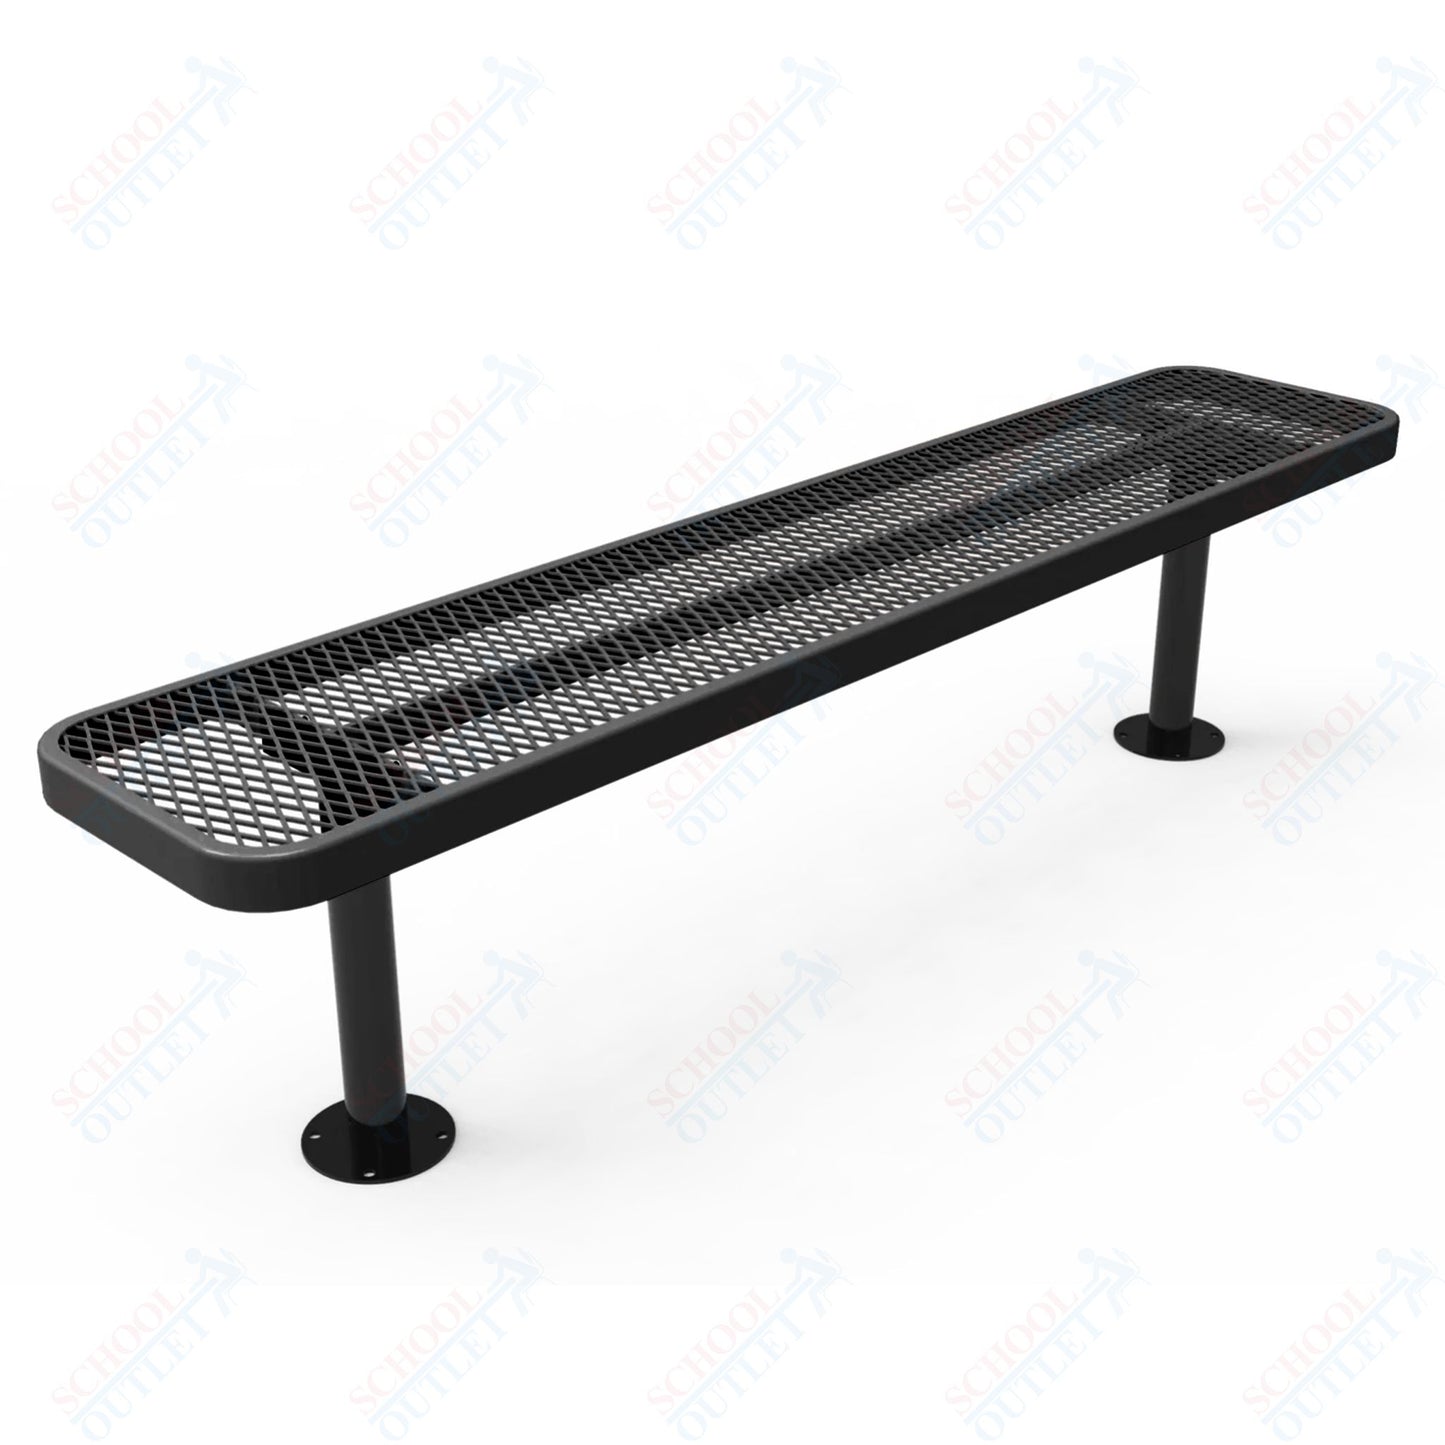 MyTcoat - Player's Outdoor Bench without Back - Inground Mount 6' L (MYT-BPY06-34)